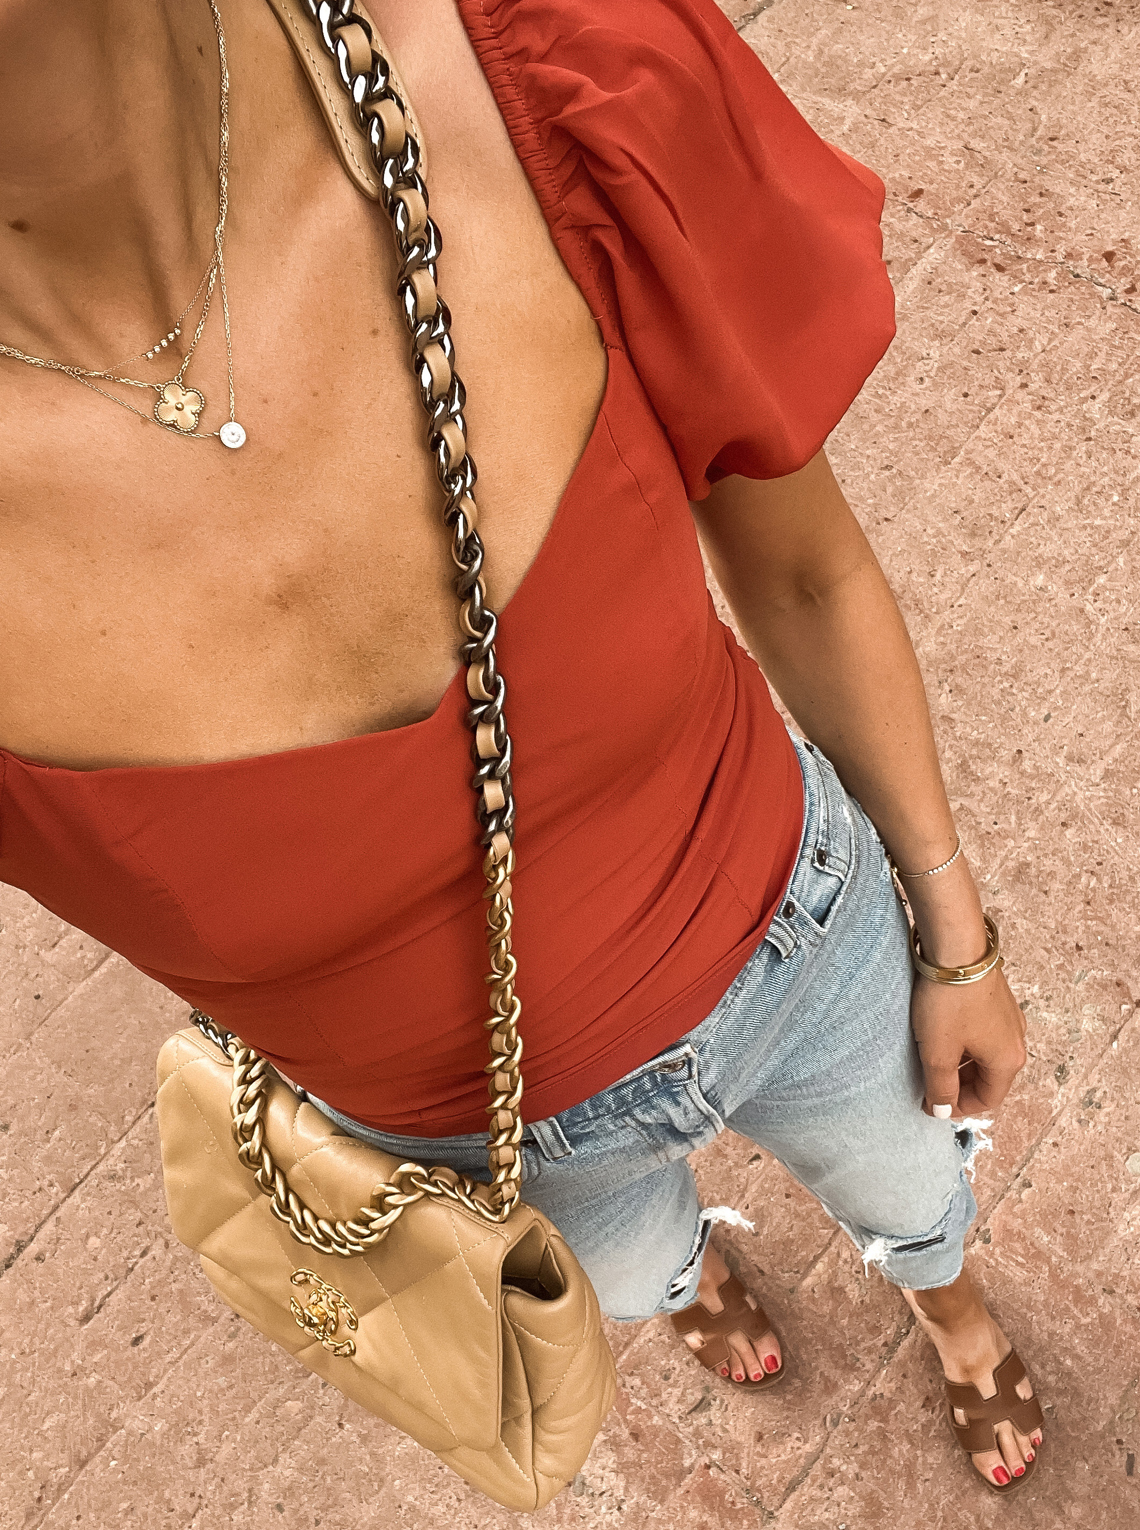 Fashion Jackson Wearing Abercrombie Red Puff Sleeve Top Abercrombie Ripped Jeans Hermes Oran Tan Sandals Chanel 19 Beige Handbag